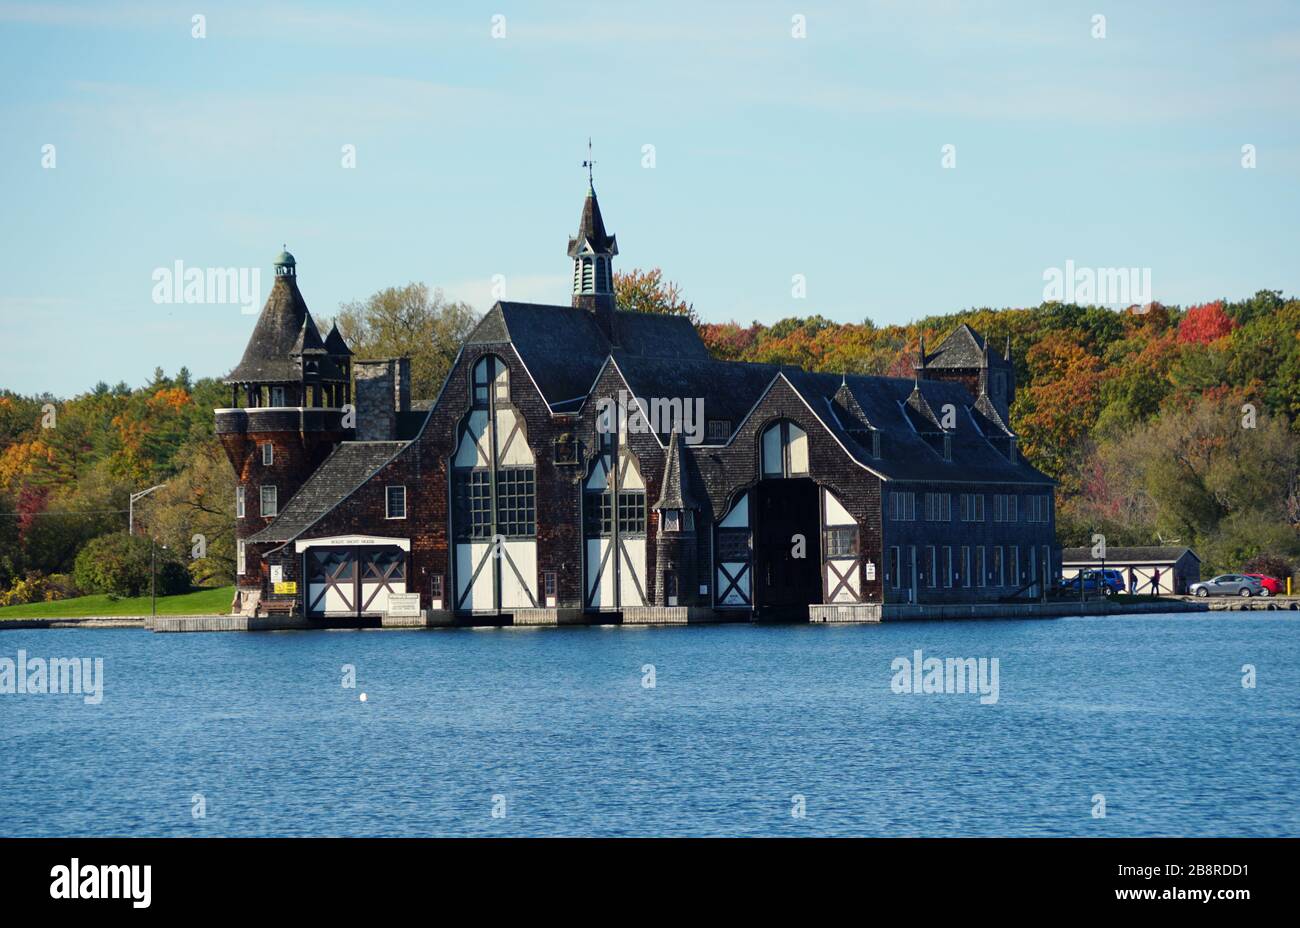 Alexandria Bay, New York, U.S.A - October 24, 2019 - The view of Boldt Yacht House overlooking striking fall foliage along St Lawrence River Stock Photo